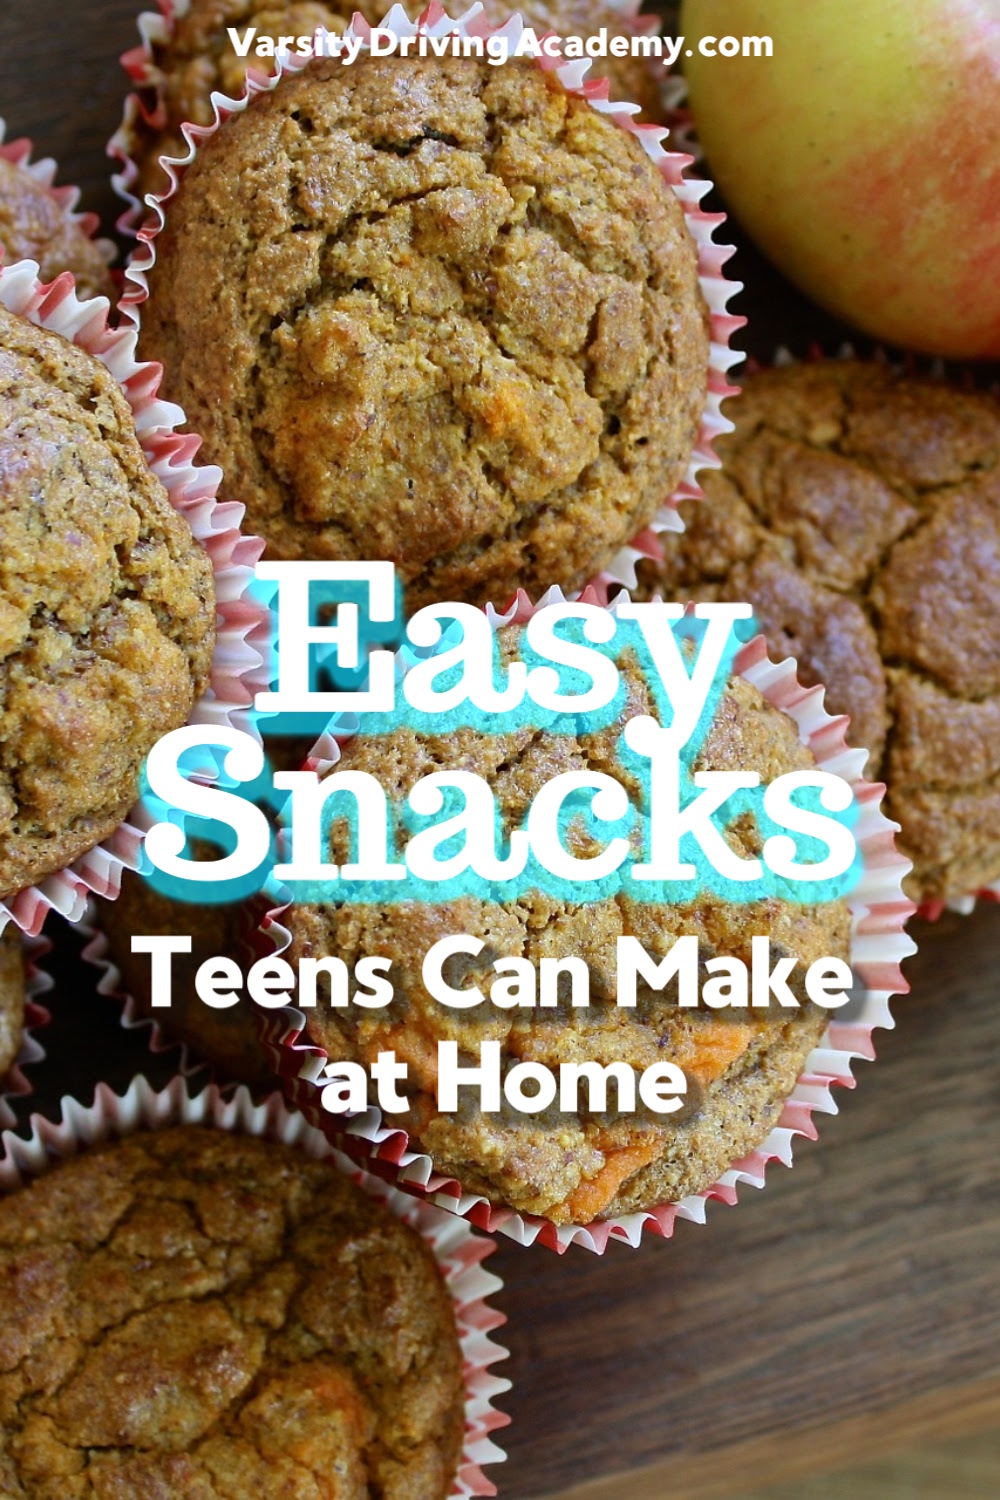 There are some really easy snacks teens can make at home that are delicious, and healthy, but more delicious than healthy. But also healthy. 